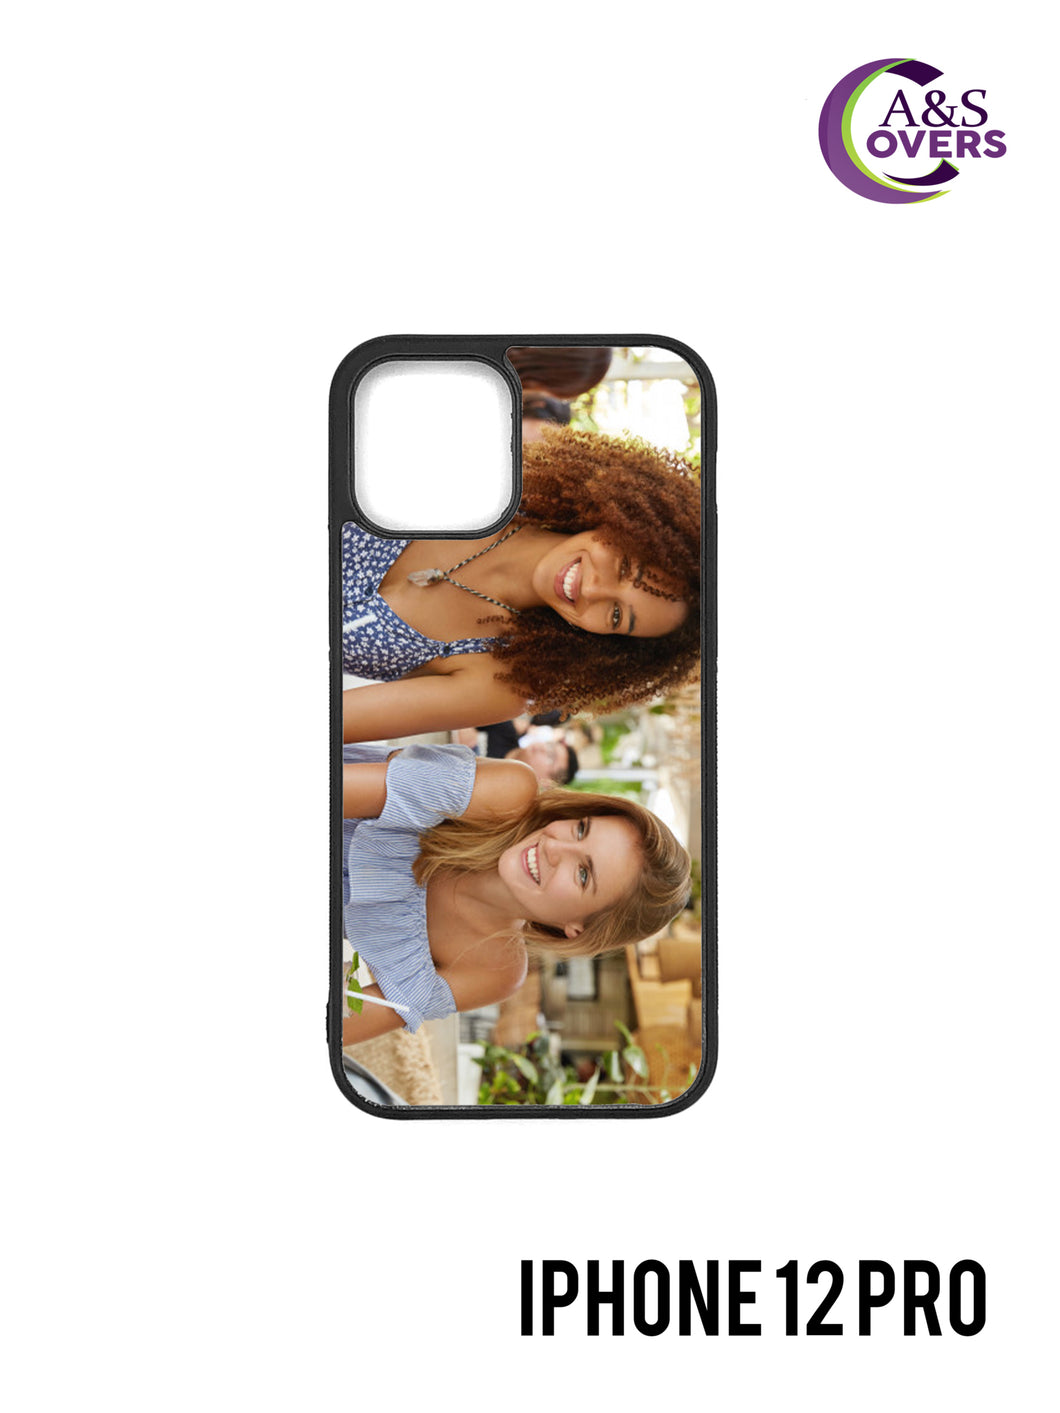 Iphone 12 Pro Grip Case - A&S Covers